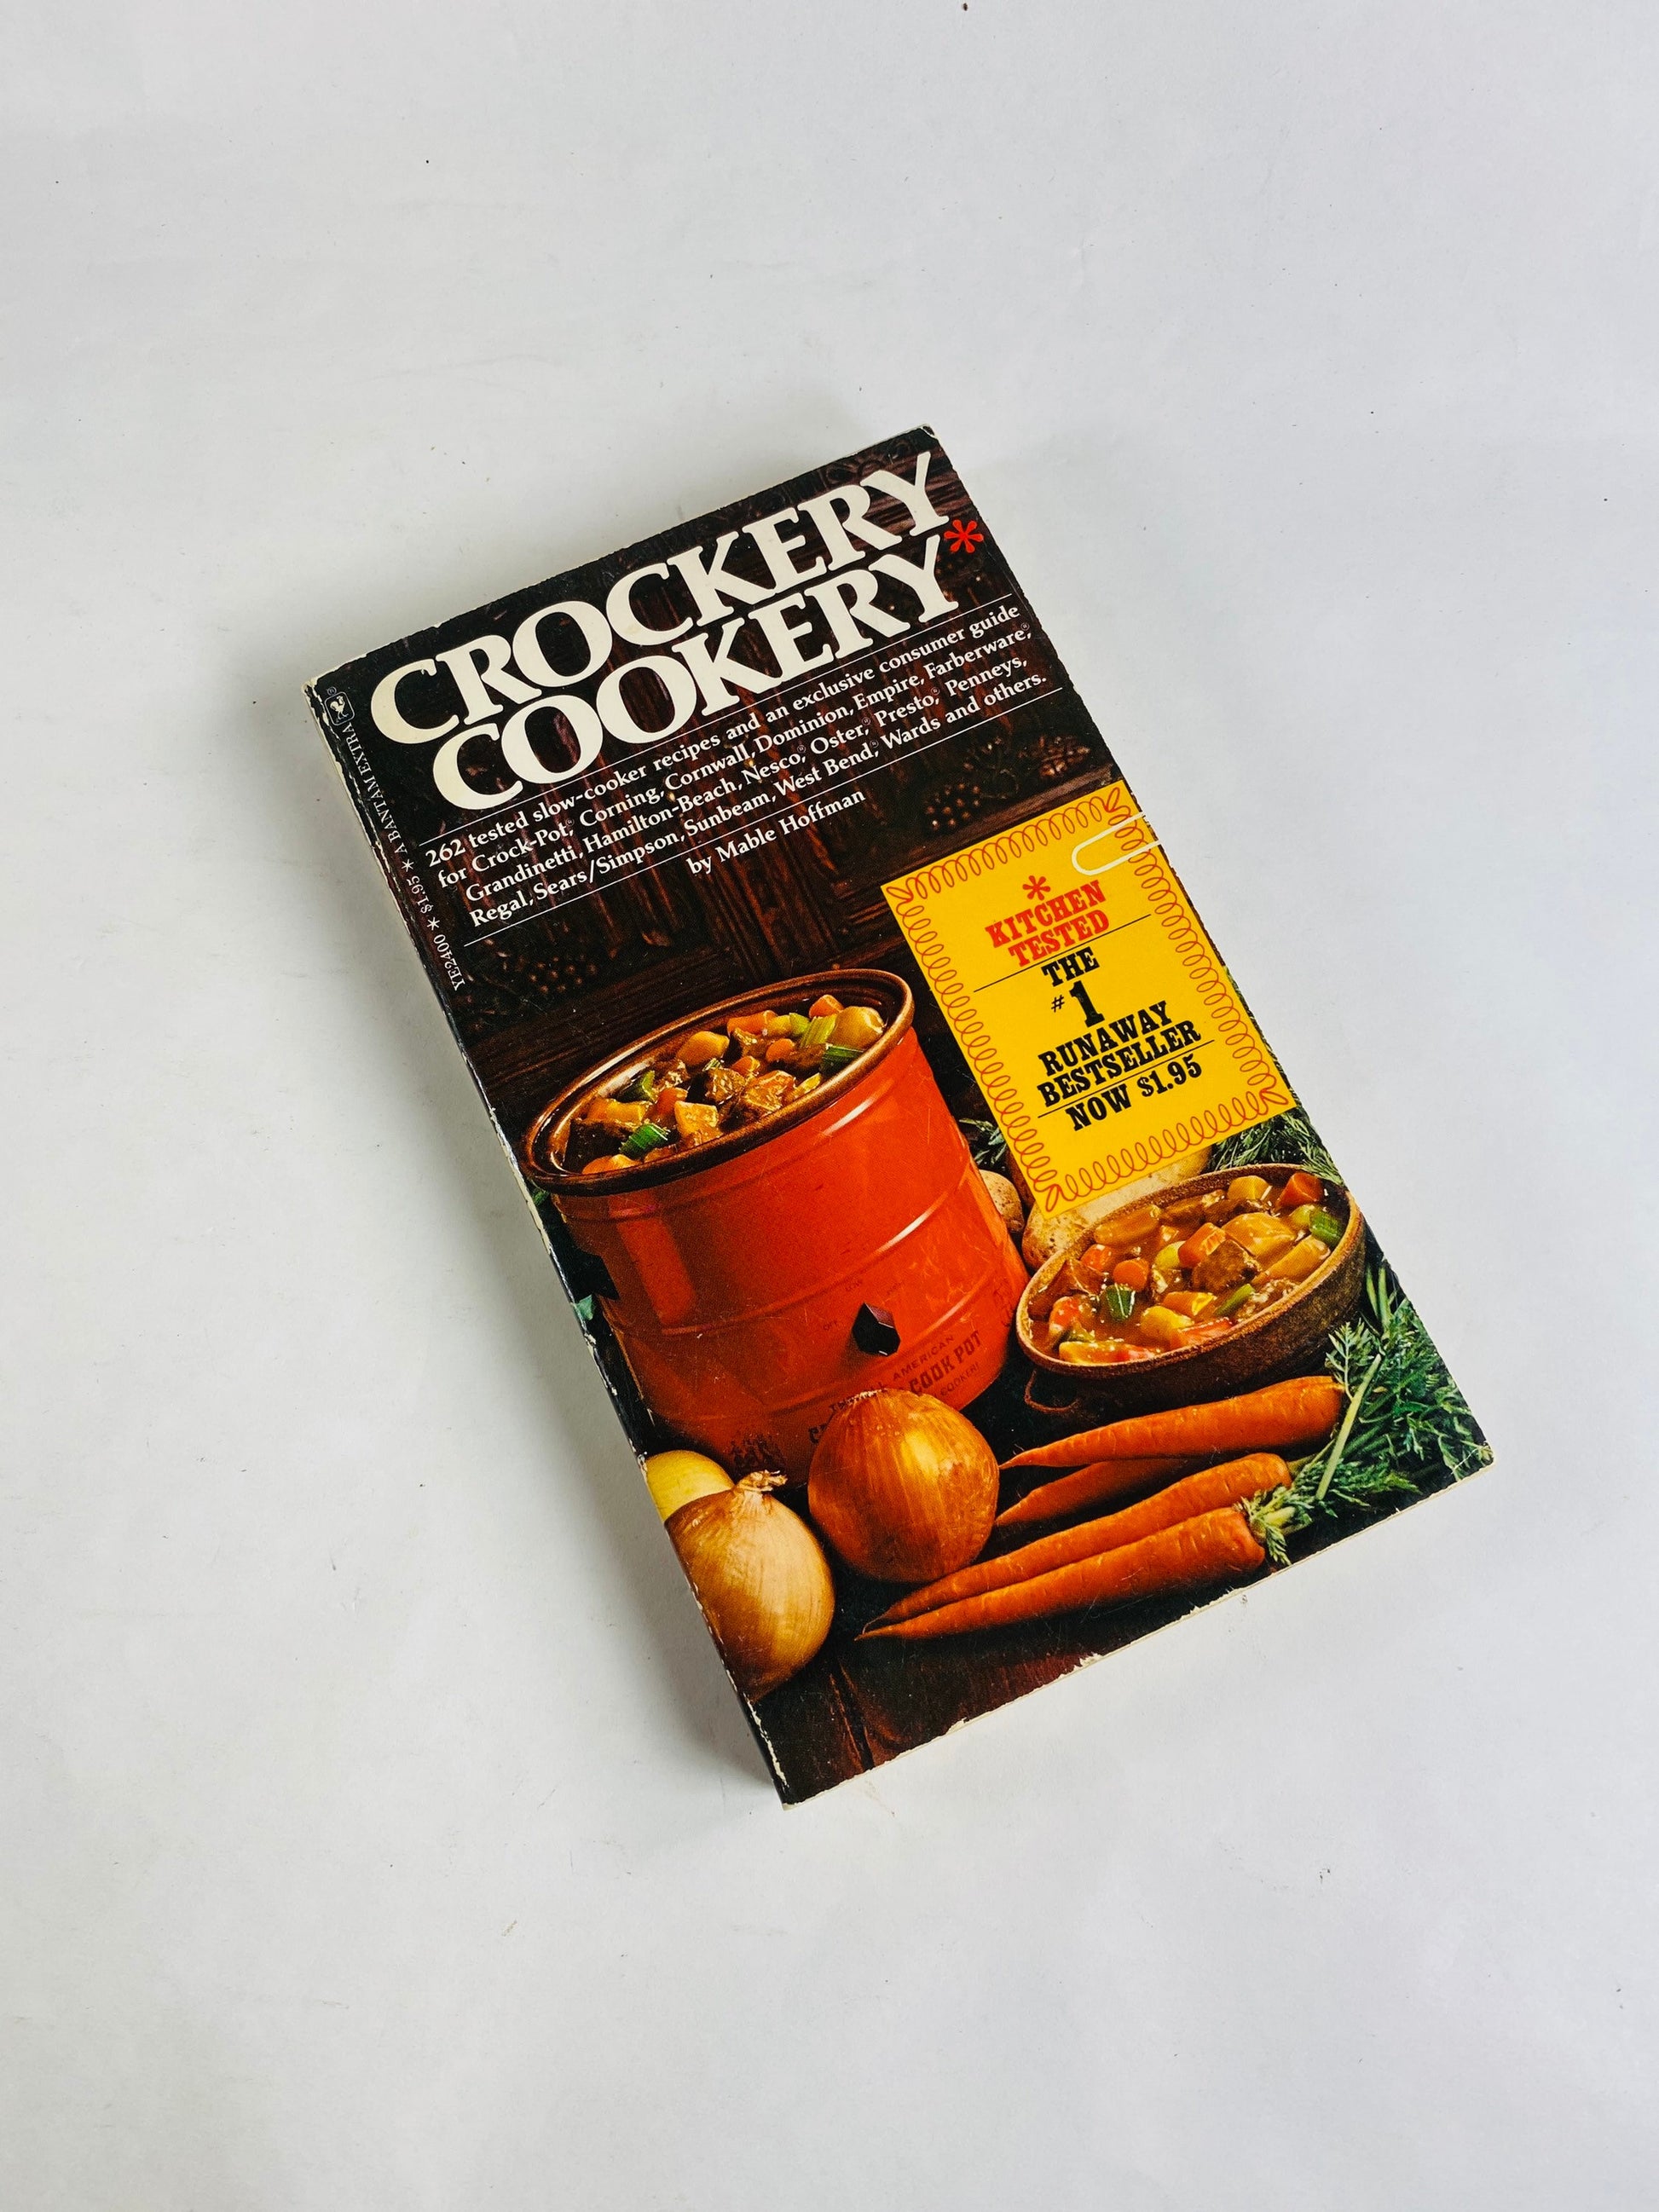 Crockpot Cooking vintage crockery paperback cookbook with recipes and directions beef chicken vegetables desserts